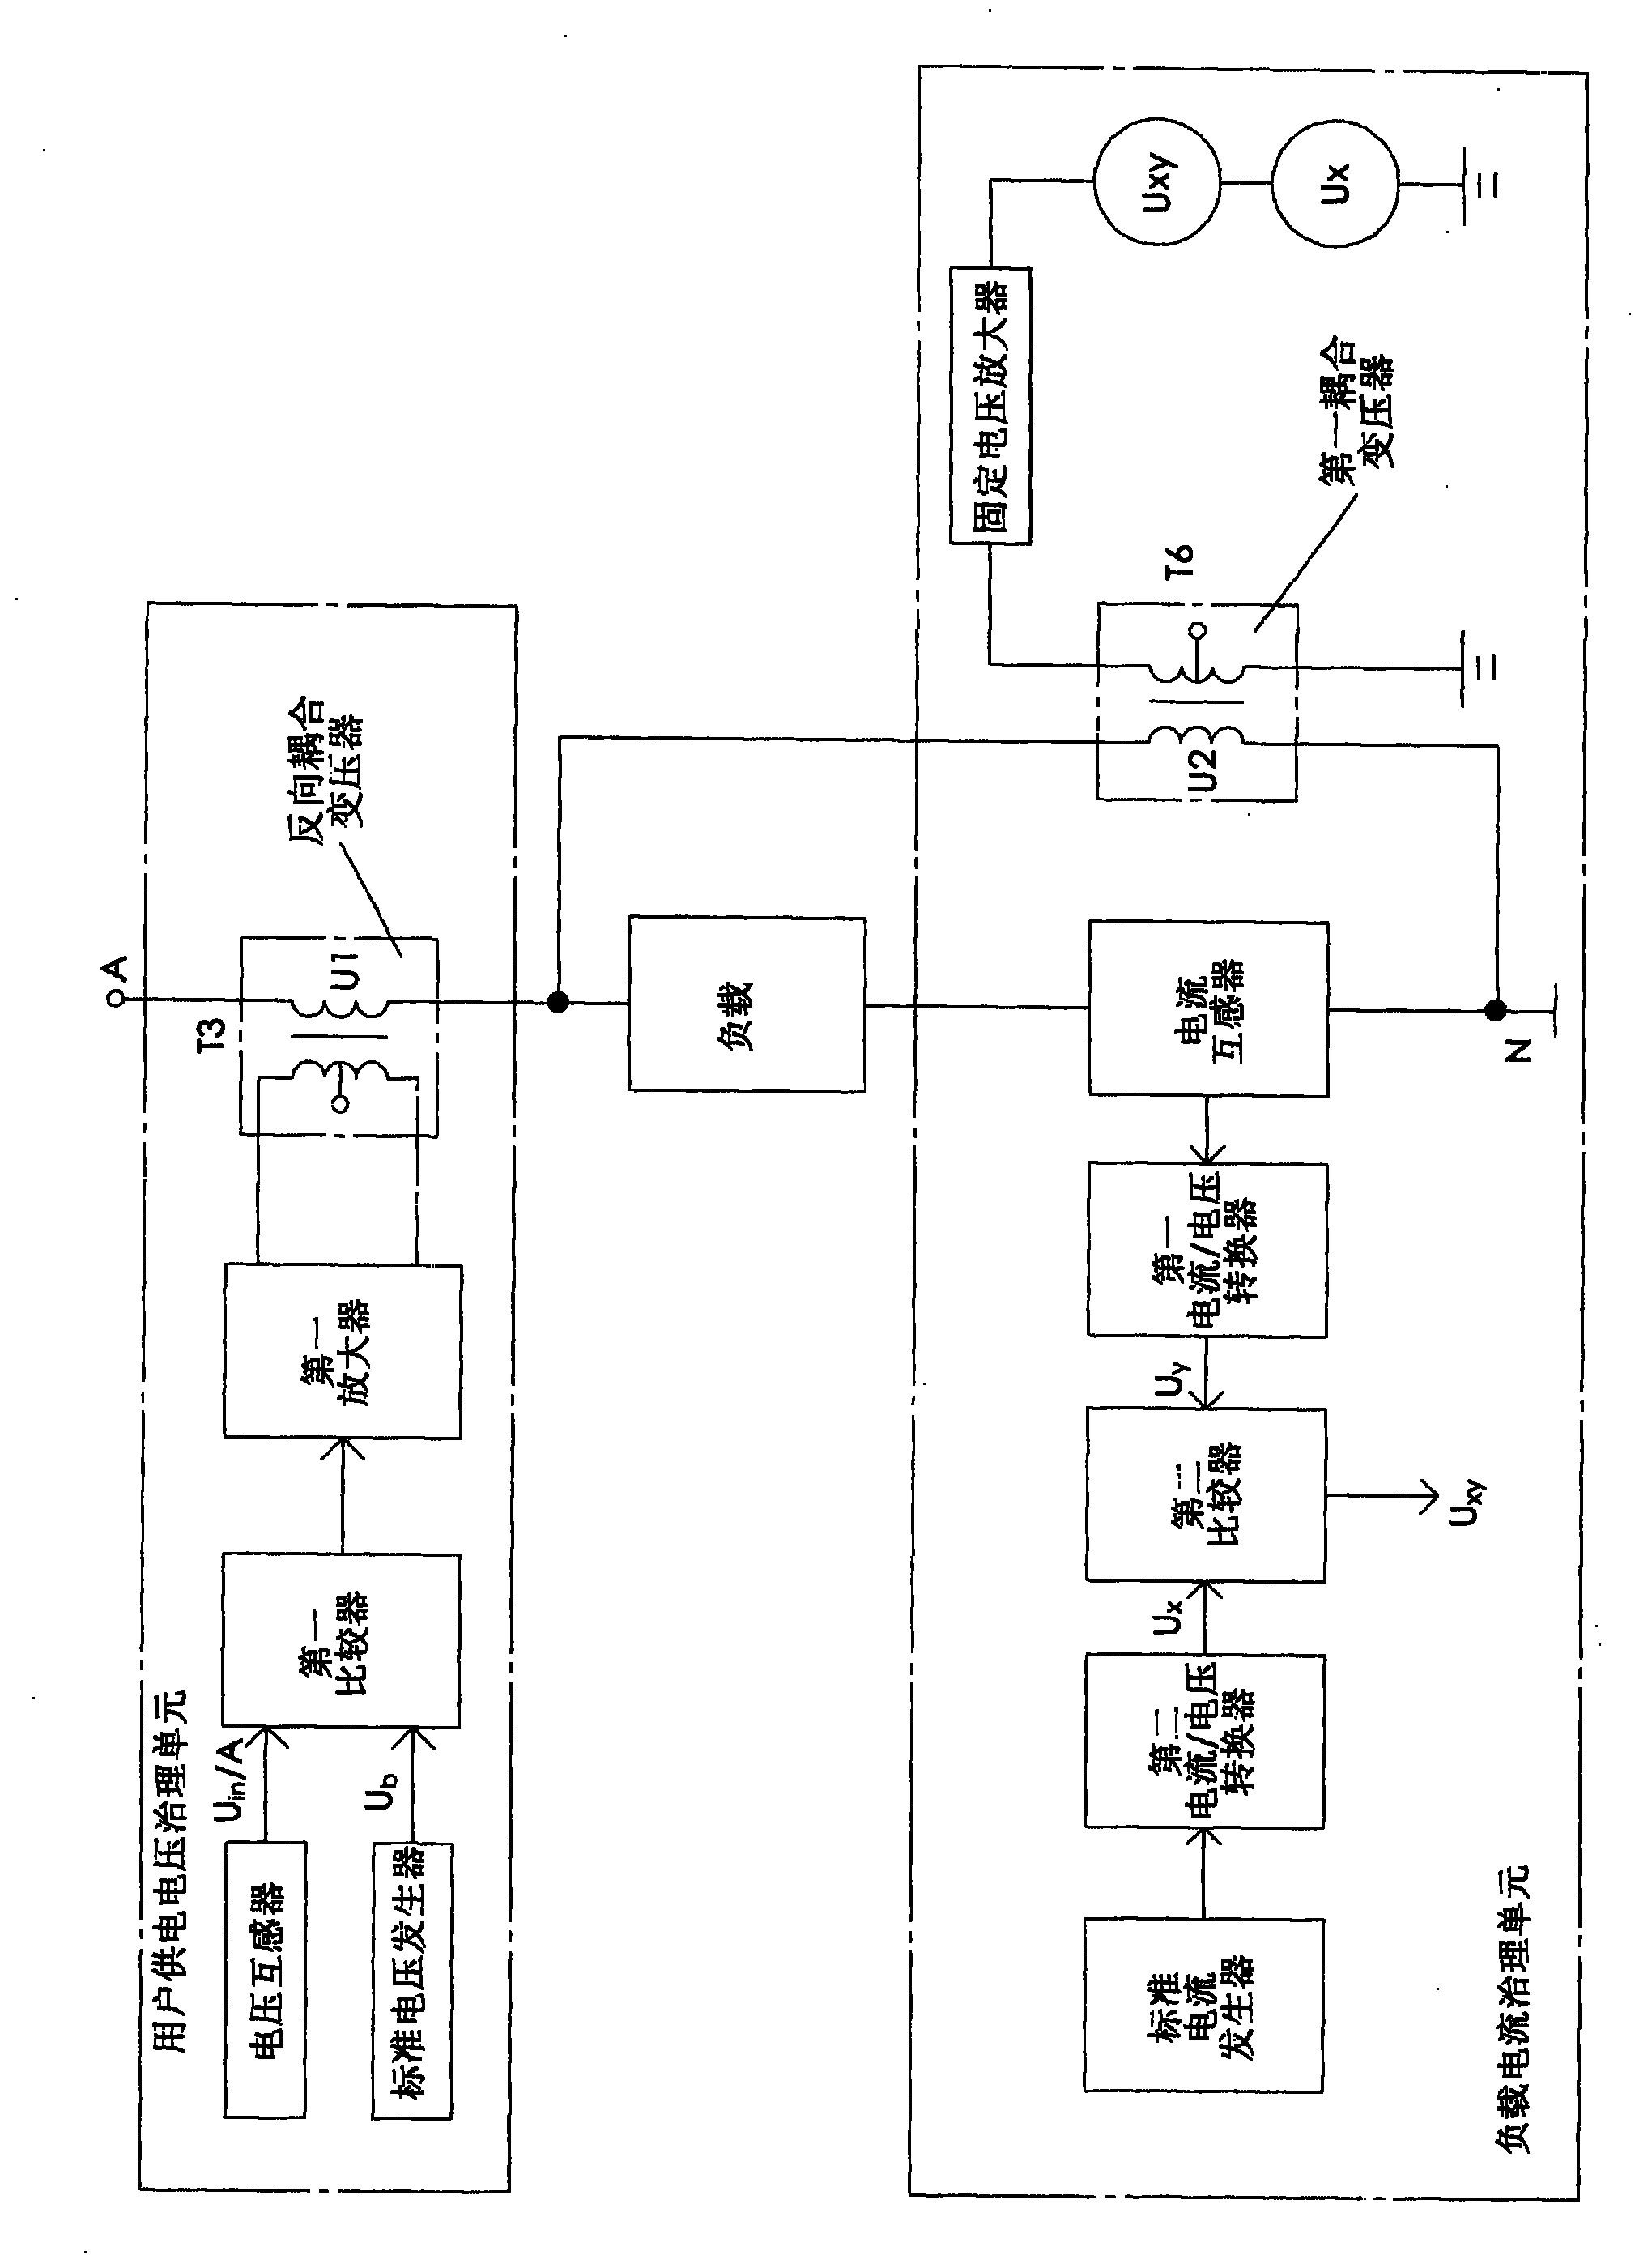 User power supply voltage and load current control device working according to electric network requirements and user need